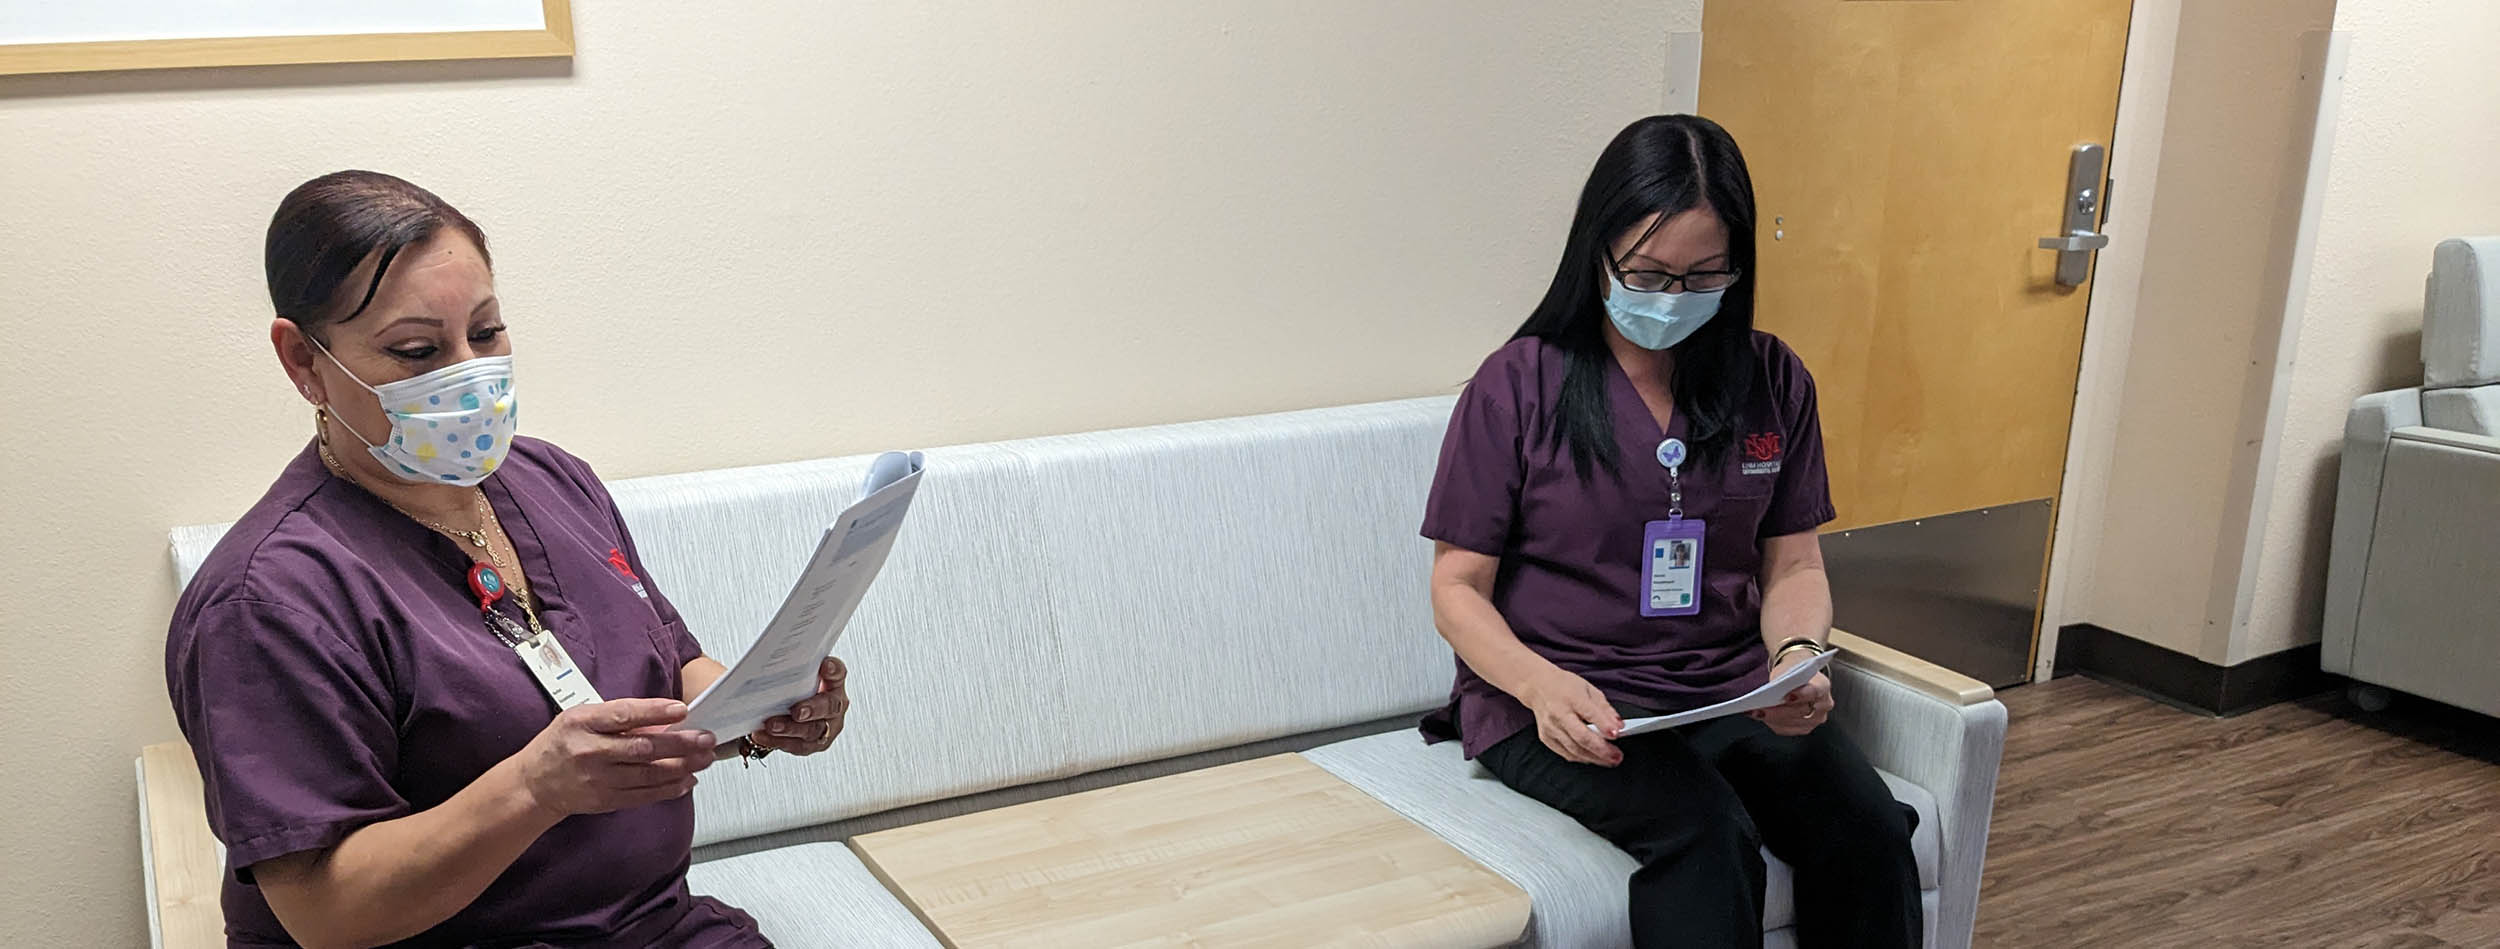 Two Critical Care Tower employees sit on a couch reading a furniture catalog